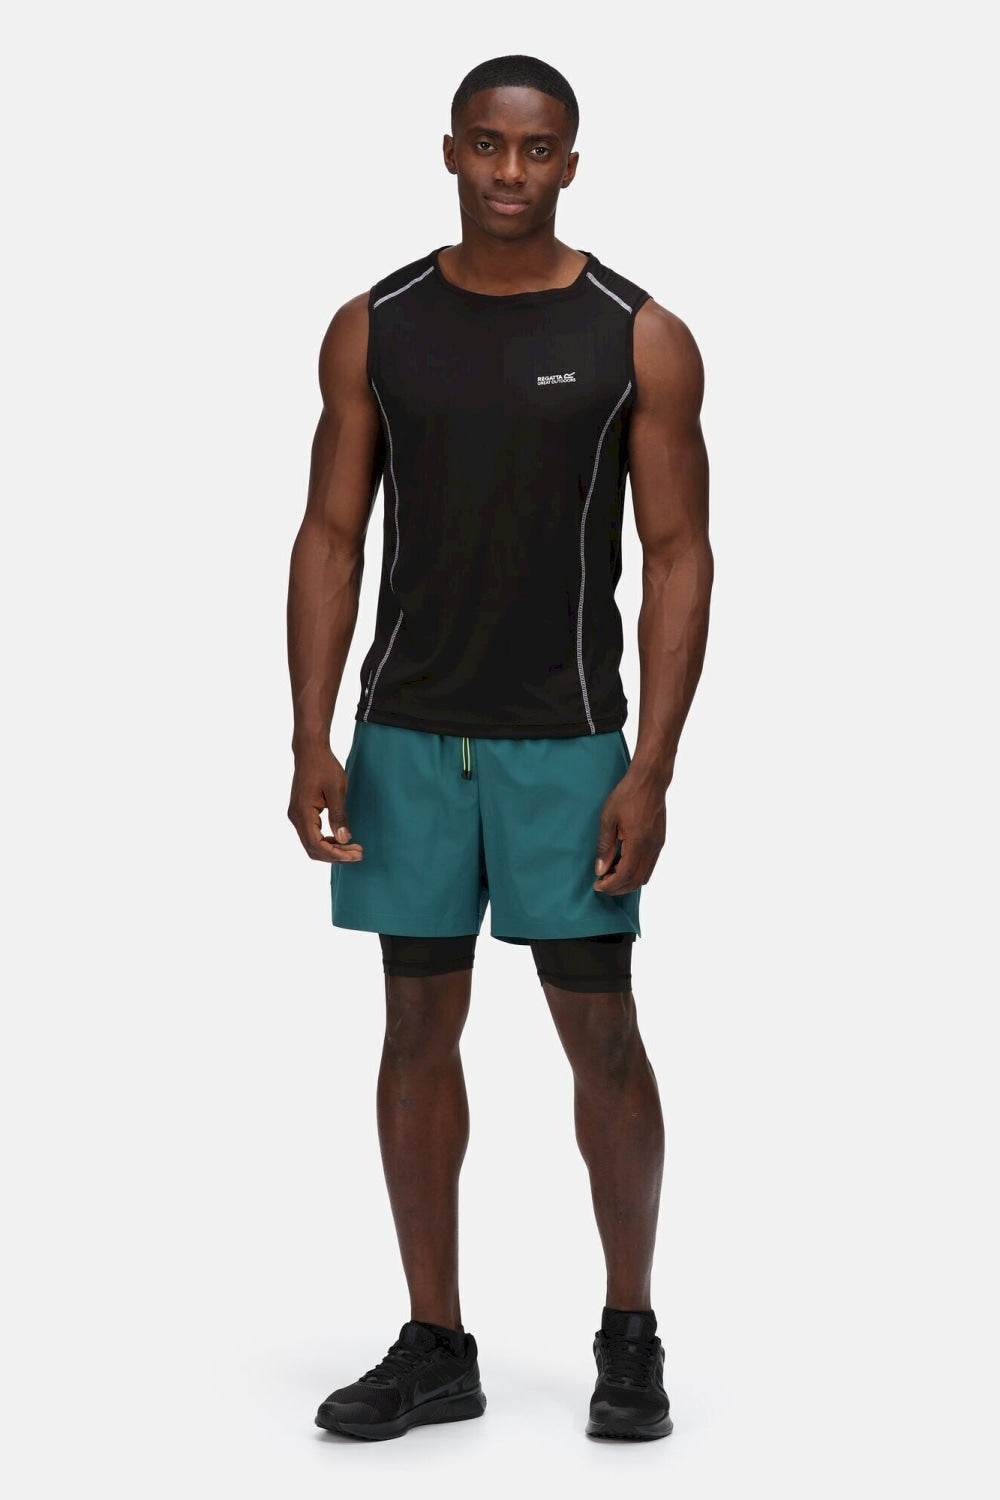 Men's Hilston 2 in 1 Shorts - Pacific Green